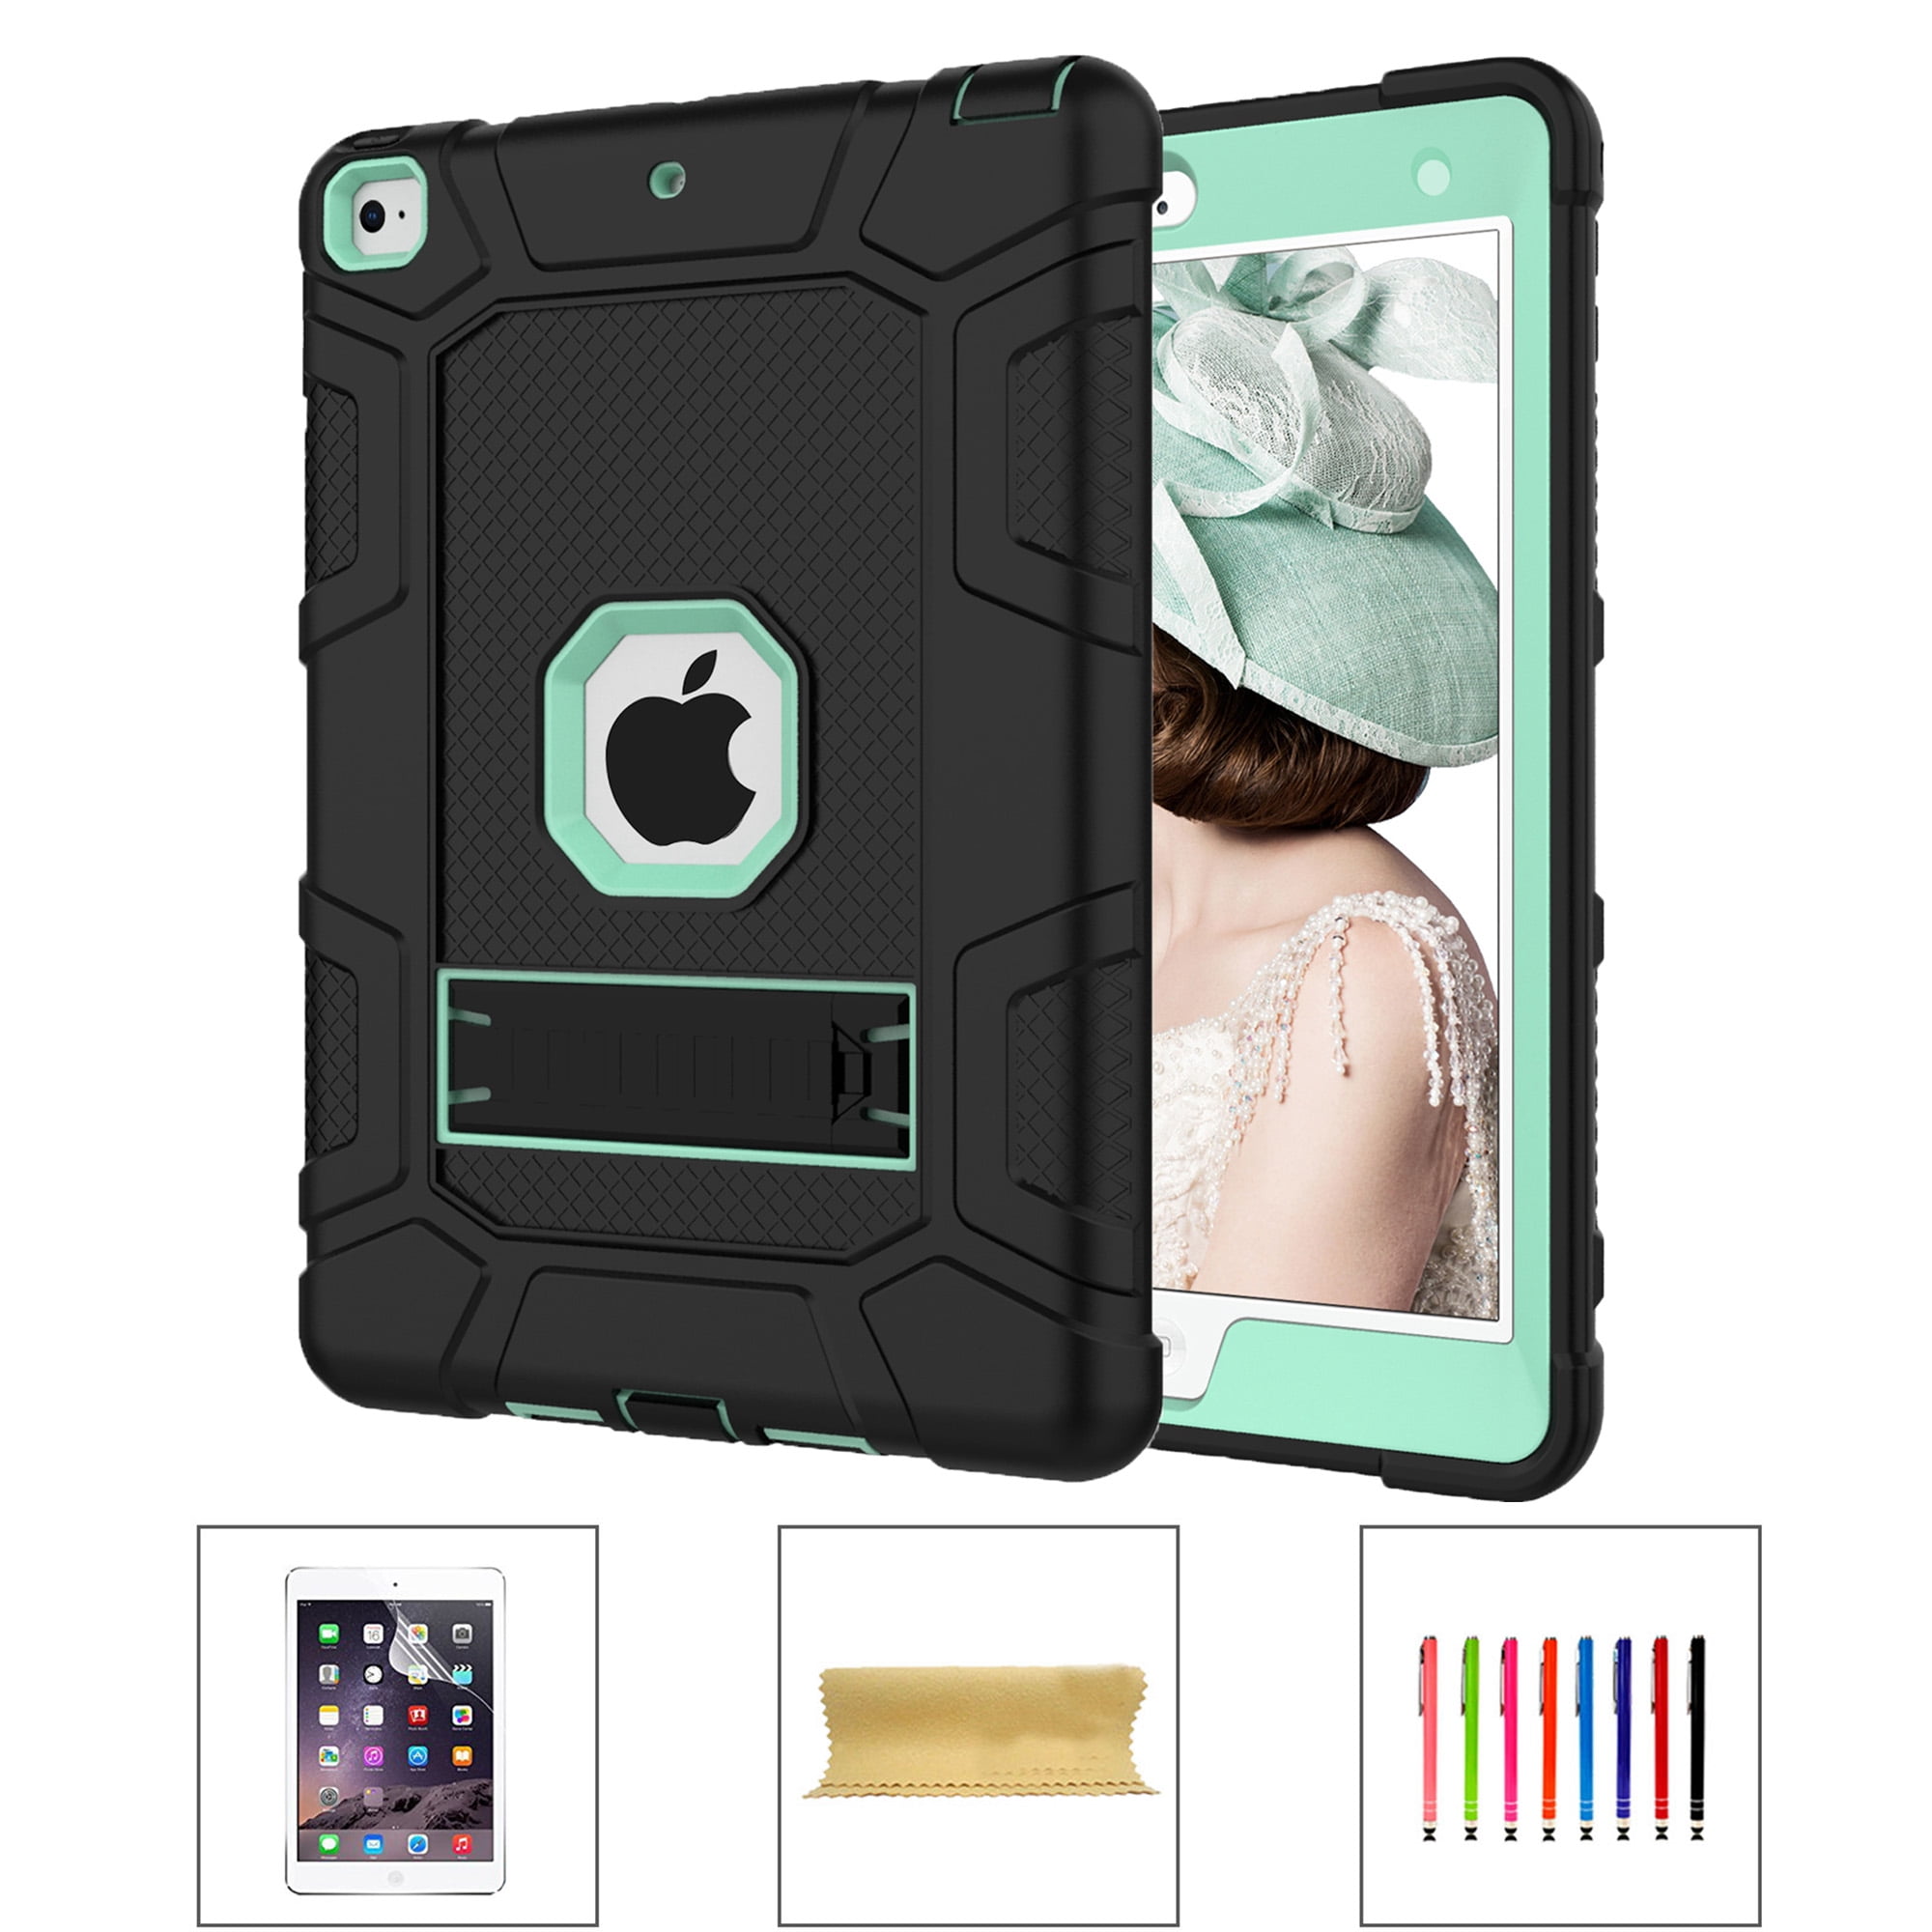 TGK Book Cover for Apple iPad 9.7 inch 2018 6th Generation (A1893 / A1954)  H Style Fashion with Hand Holder Case - TGK 